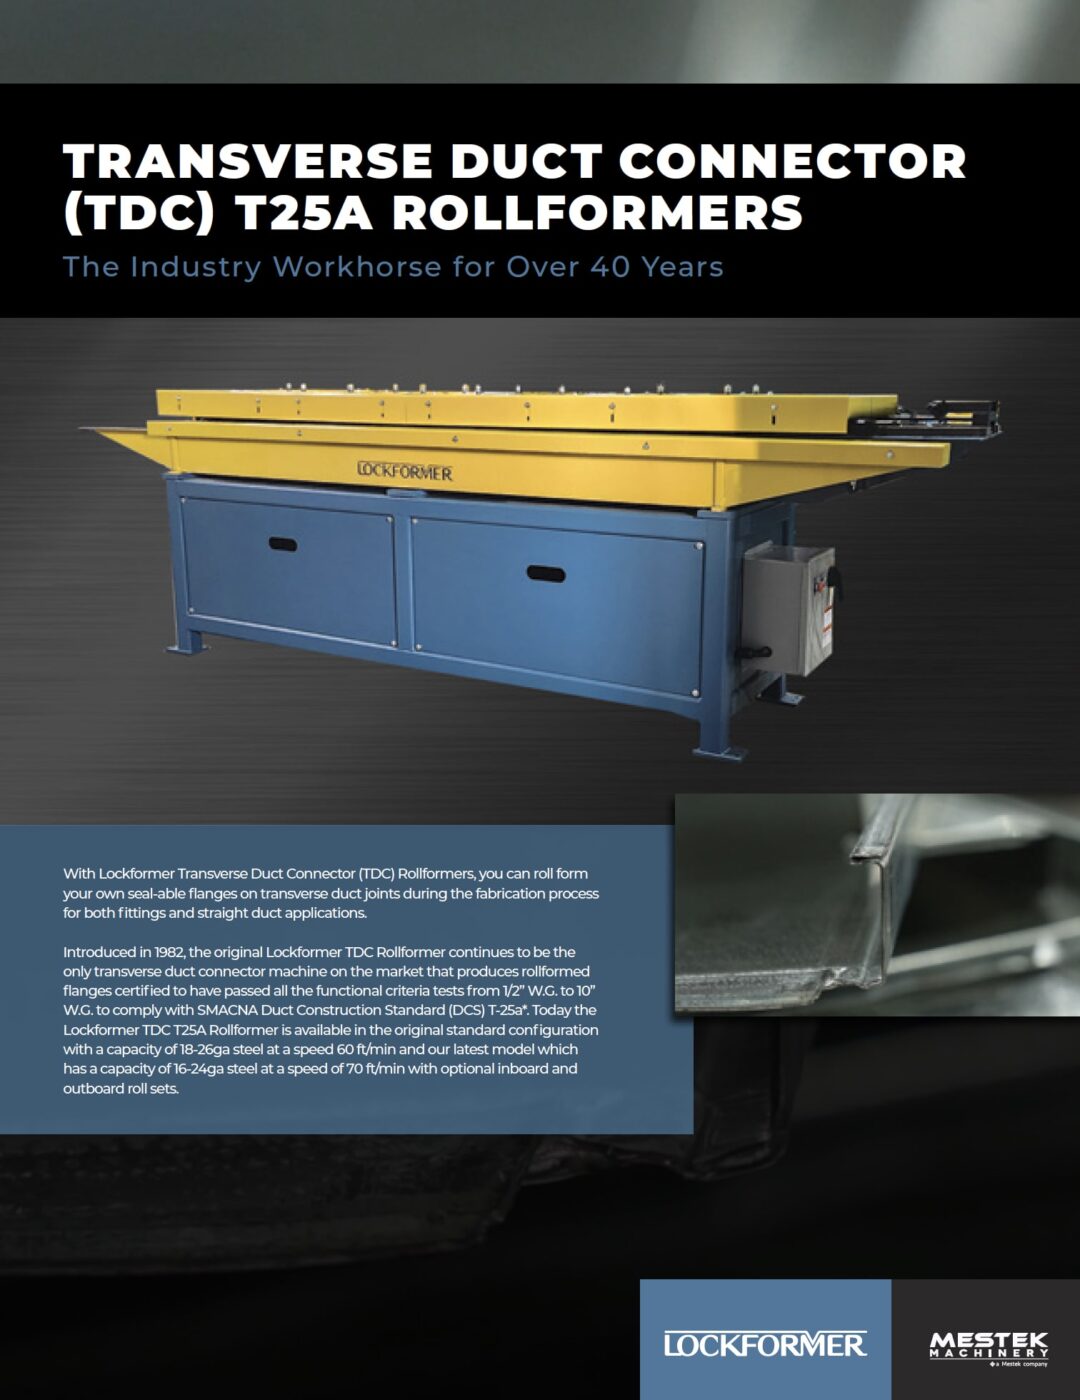 Brochure: Lockformer Transverse Duct Connected (TDC) T25a Rollformers